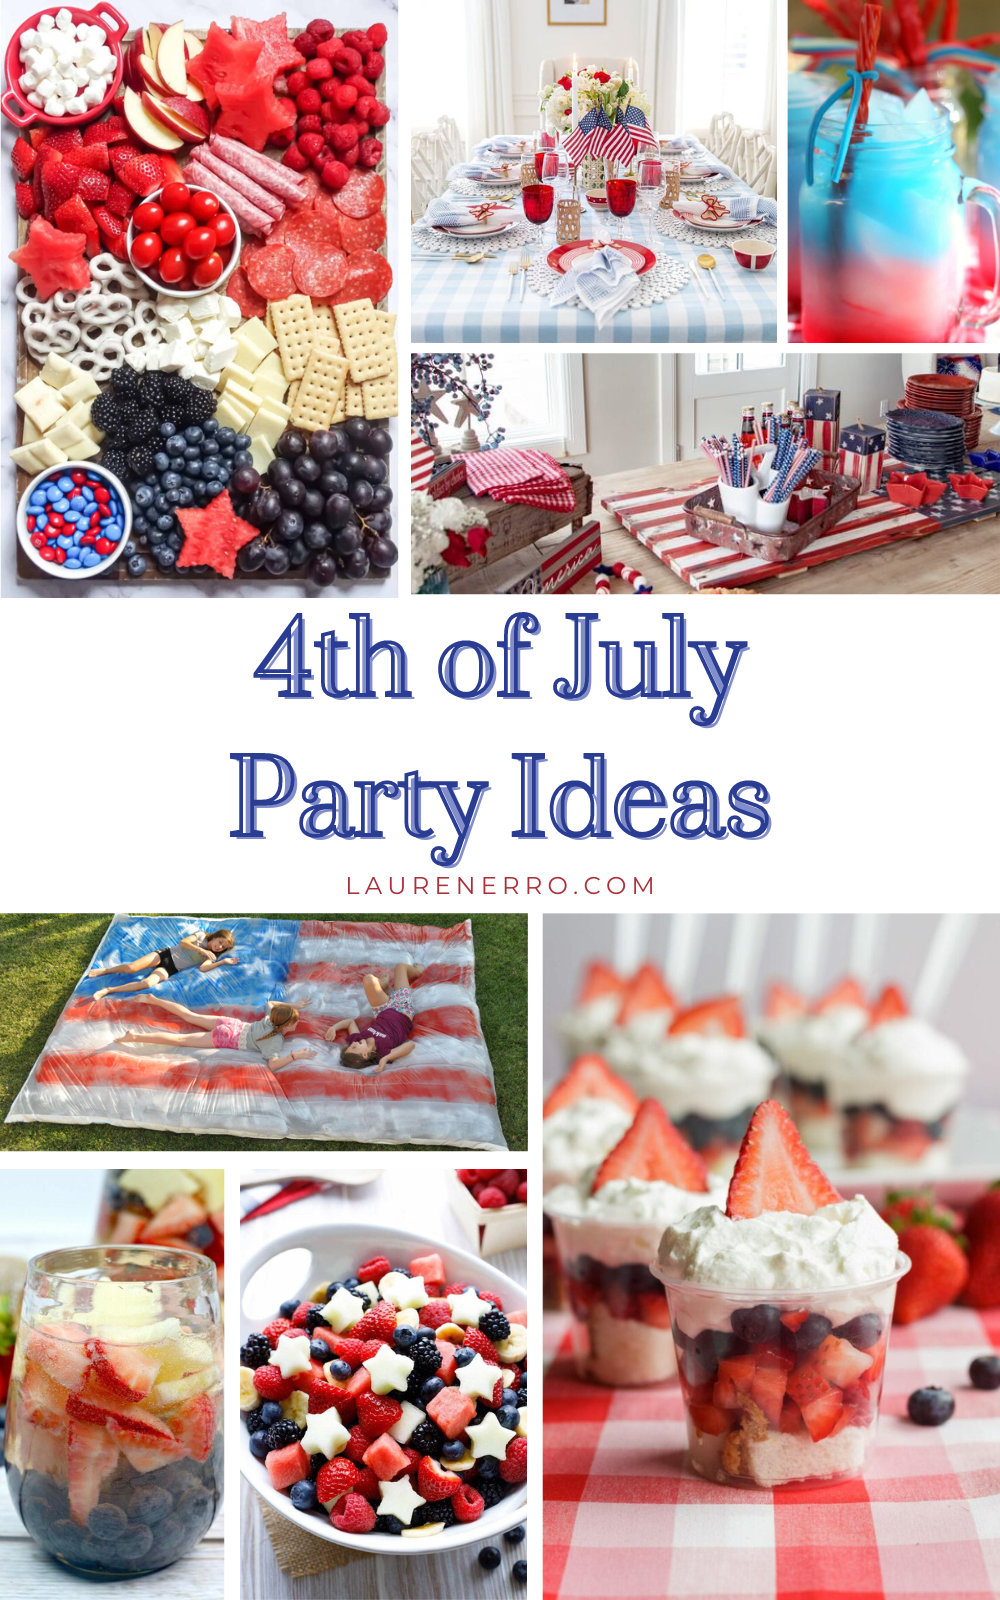 27 Patriotic and Fun 4th Of July Party Ideas